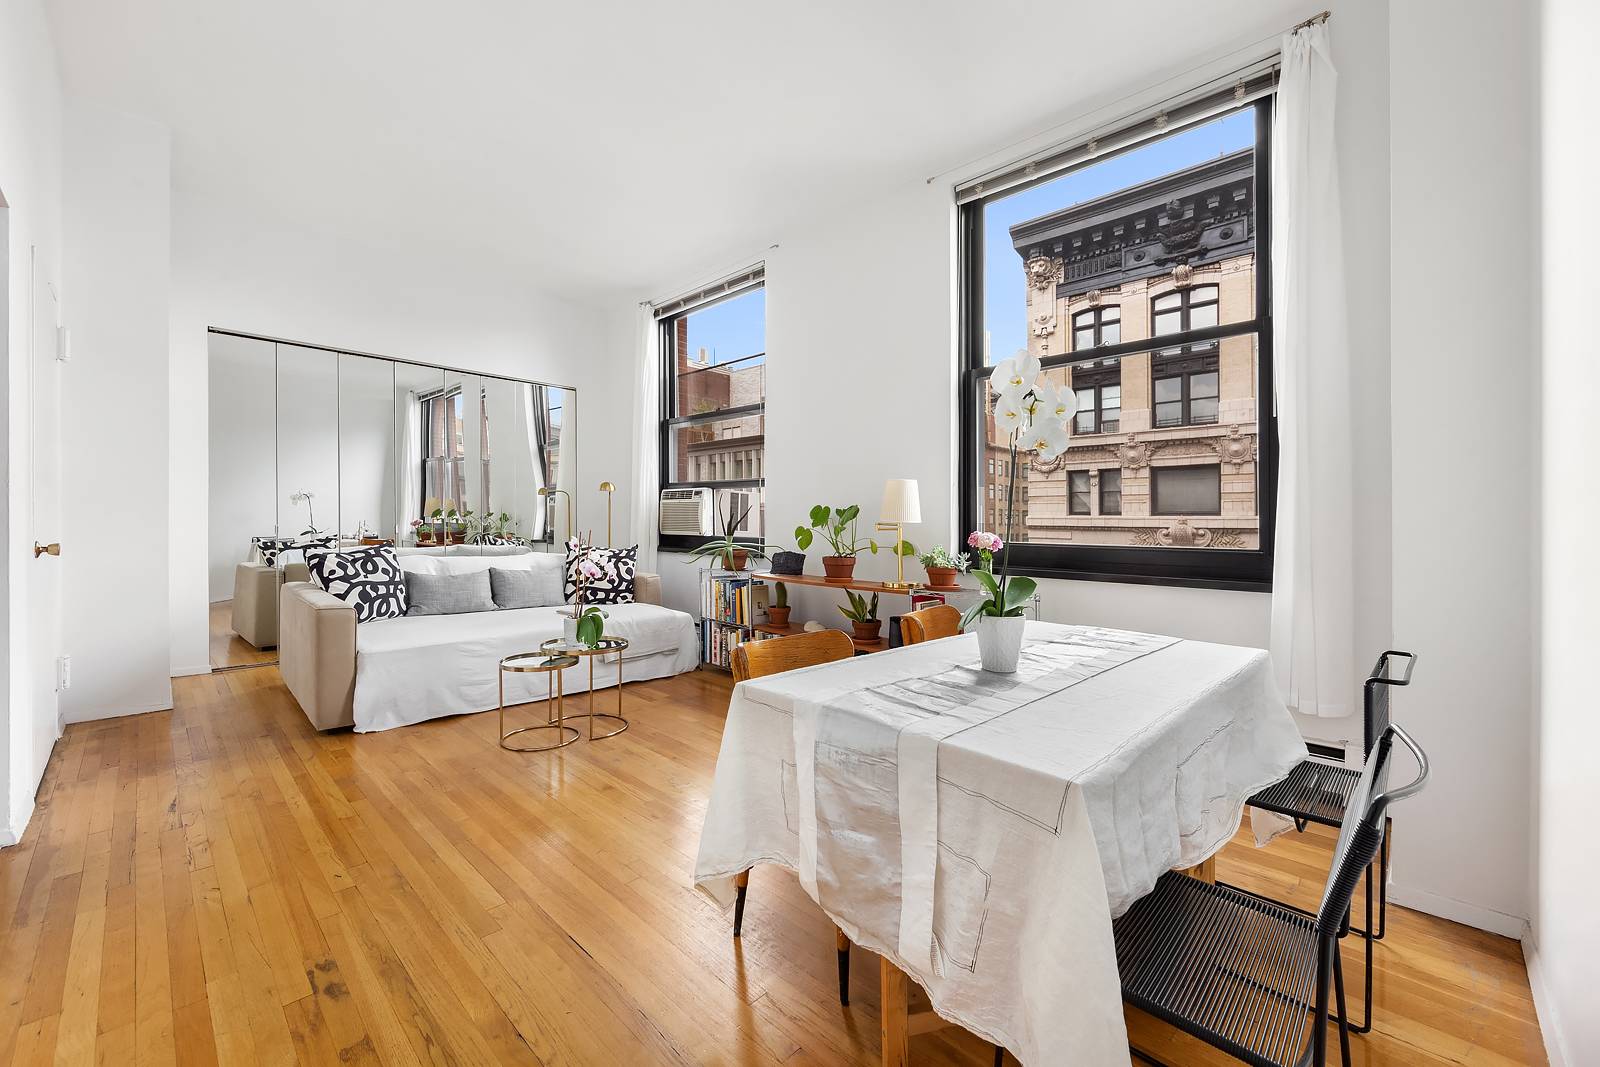 Large, sunny, loft like one bedroom apartment with massive windows and eastern light and views in a desirable full service building in fabulous Noho Greenwich Village.